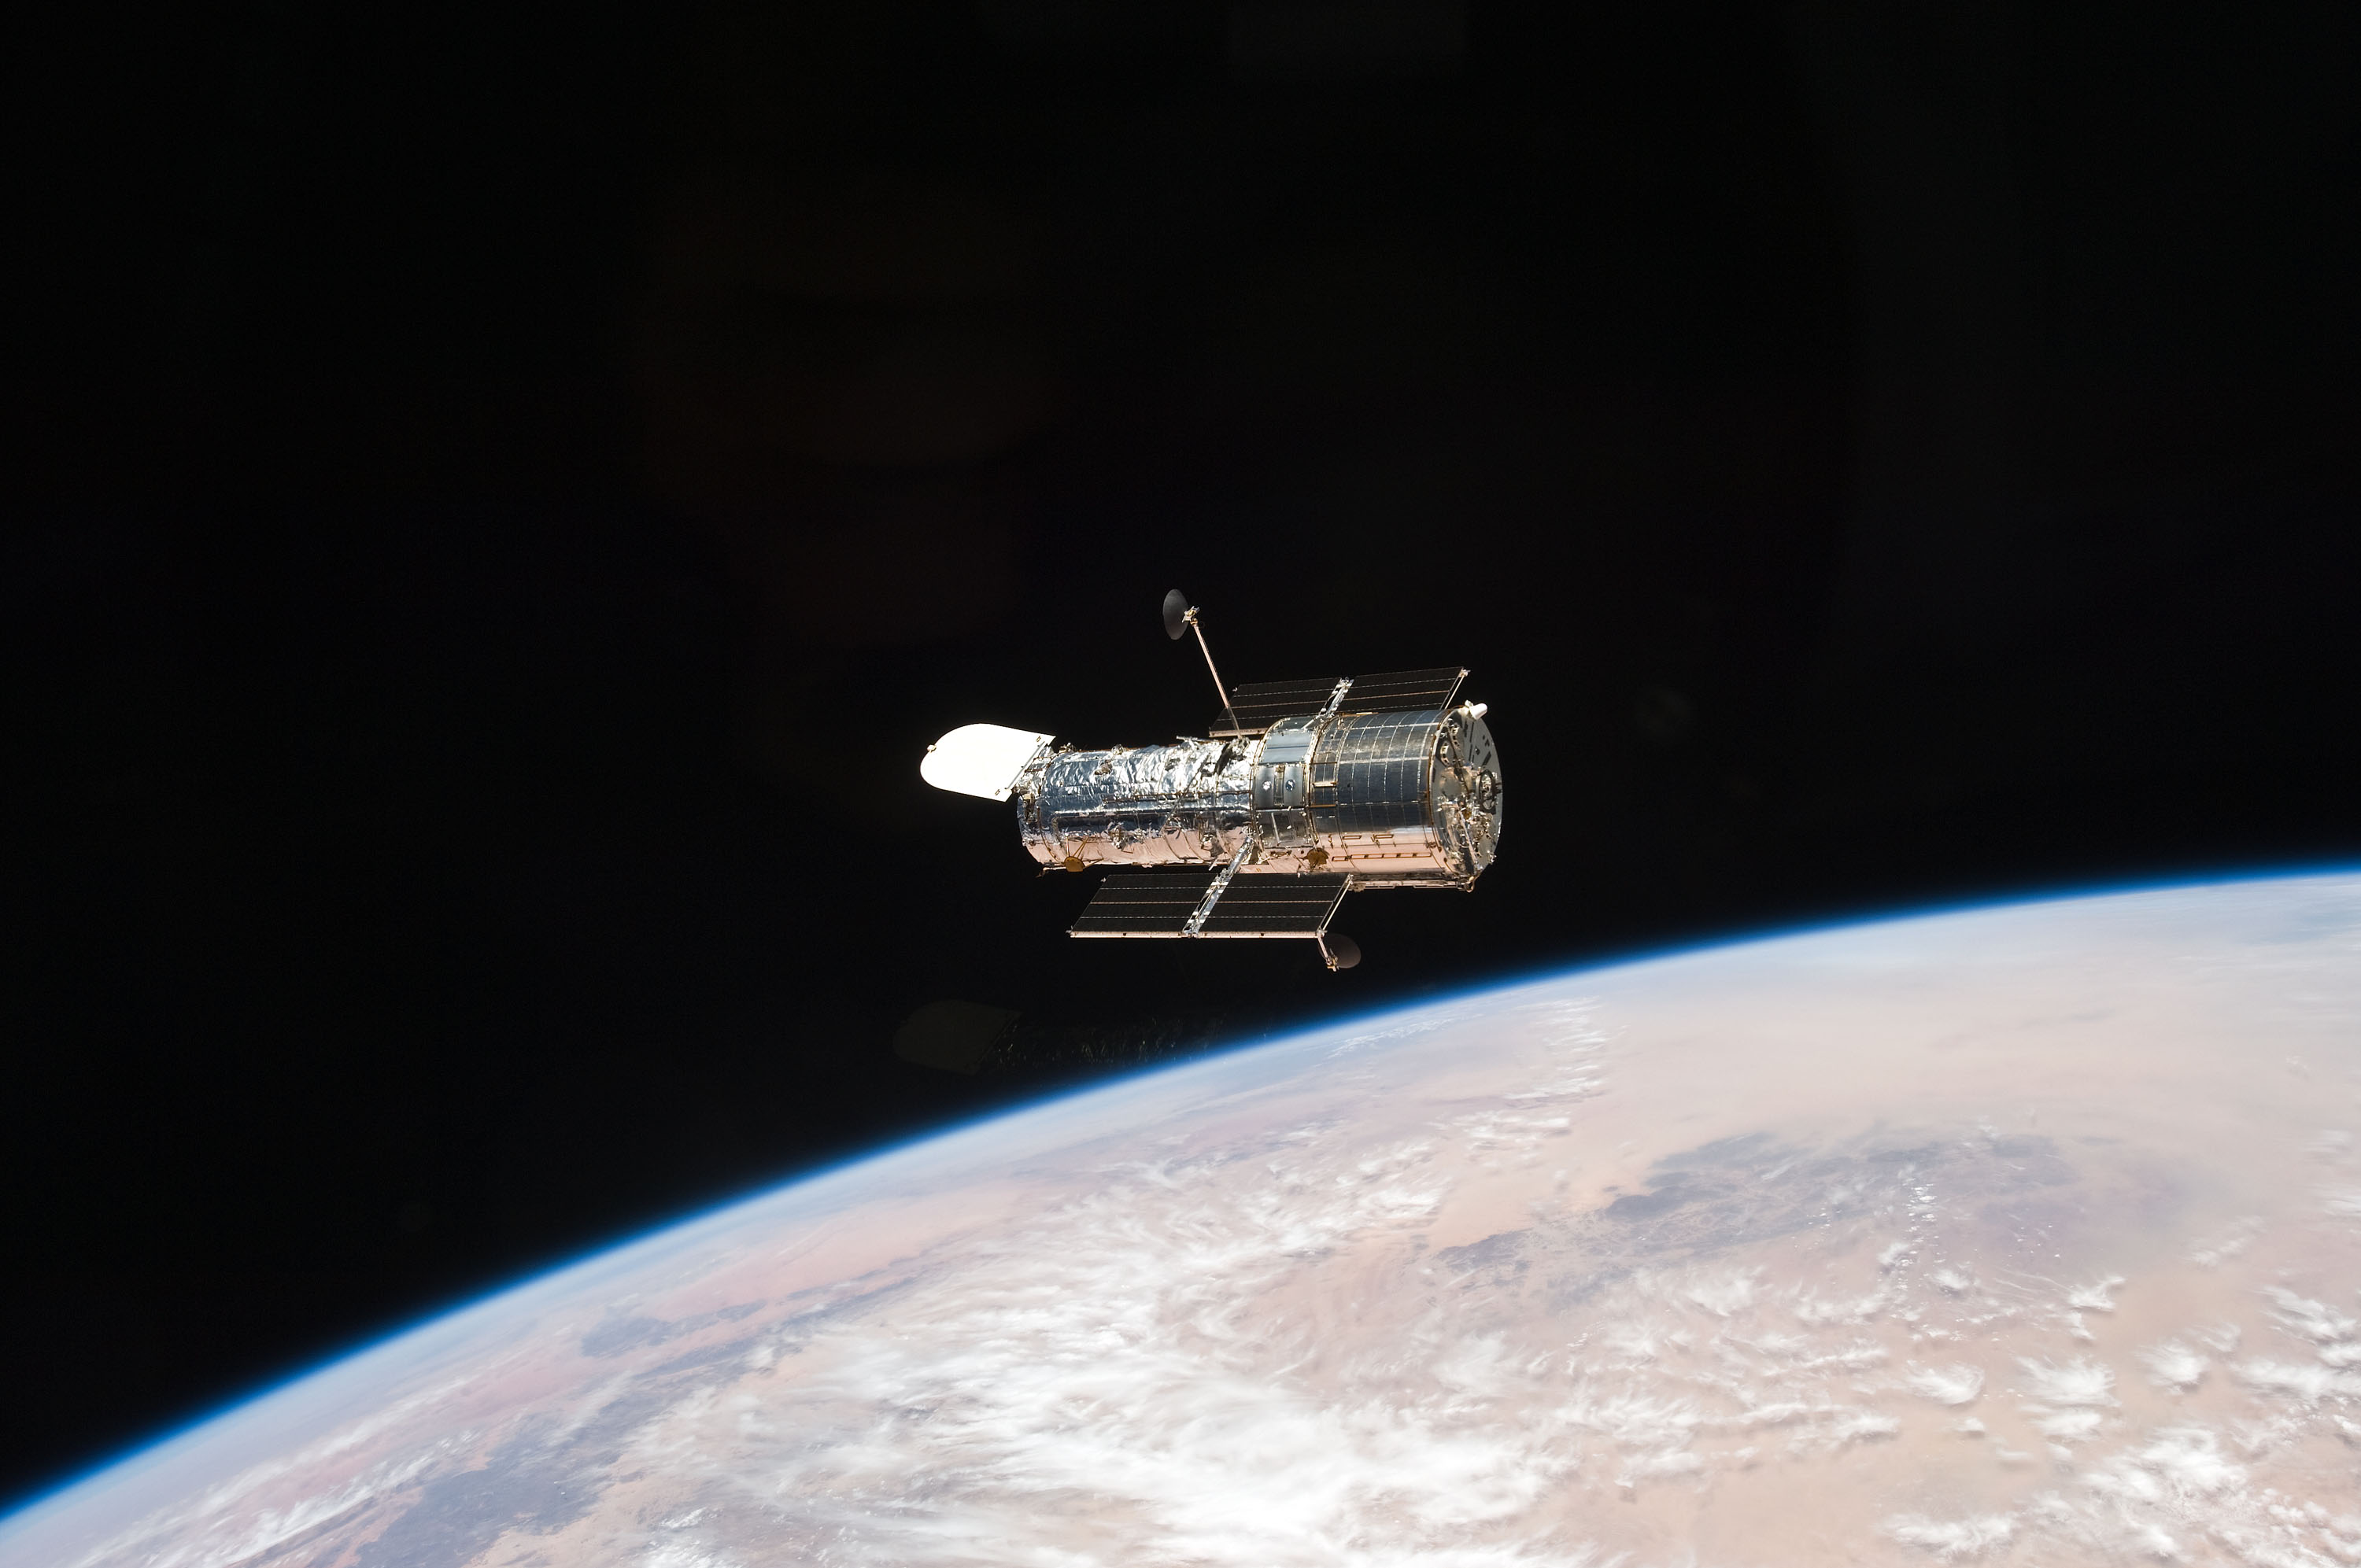 NASA’s Hubble Restarts Science in New Pointing Mode